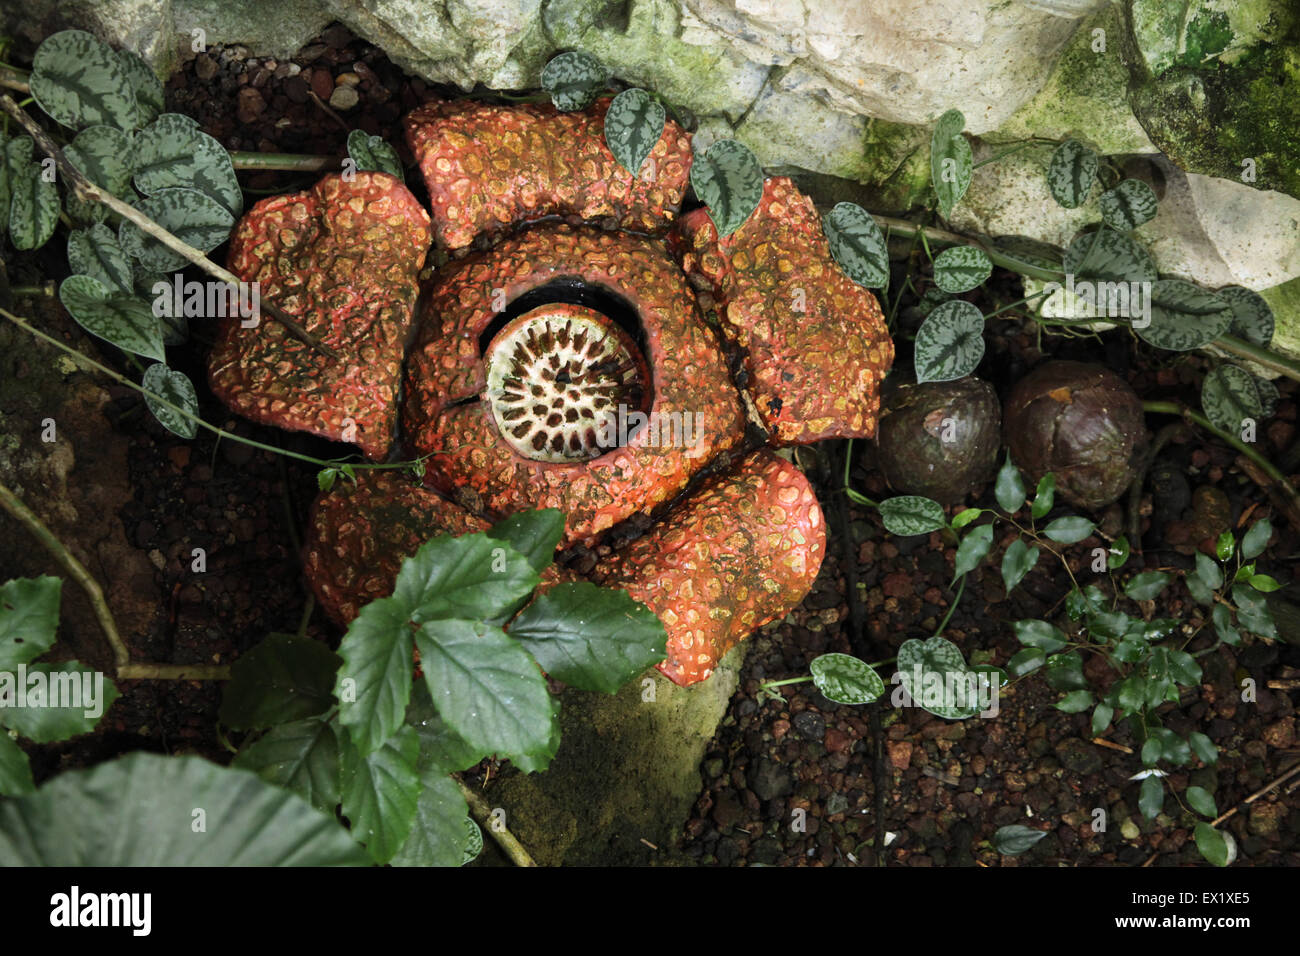 Rafflesia. The biggest flower in the world with rotting meat smell at Schönbrunn Zoo in Vienna, Austria. Stock Photo